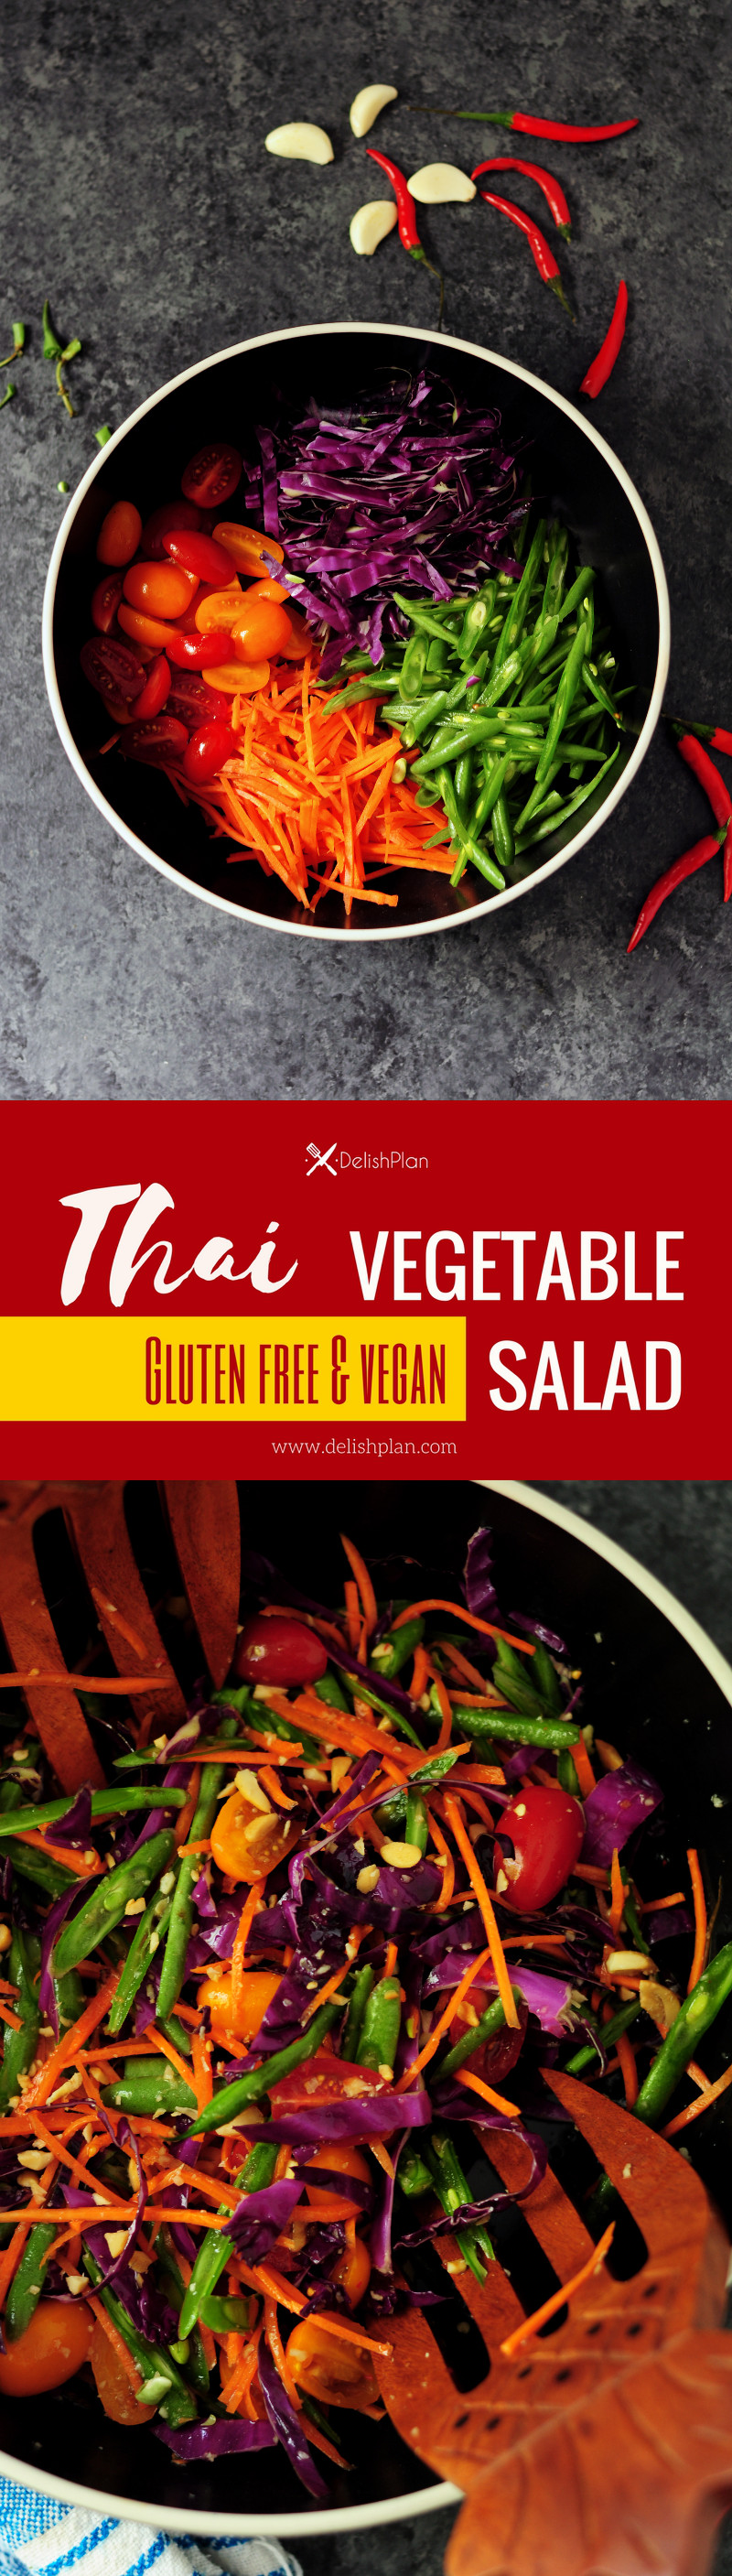 Inspired by Thai papaya salad, this simple vegetable salad features an authentic Thai flavor with a gentle kick. It’s also made gluten free and vegan.